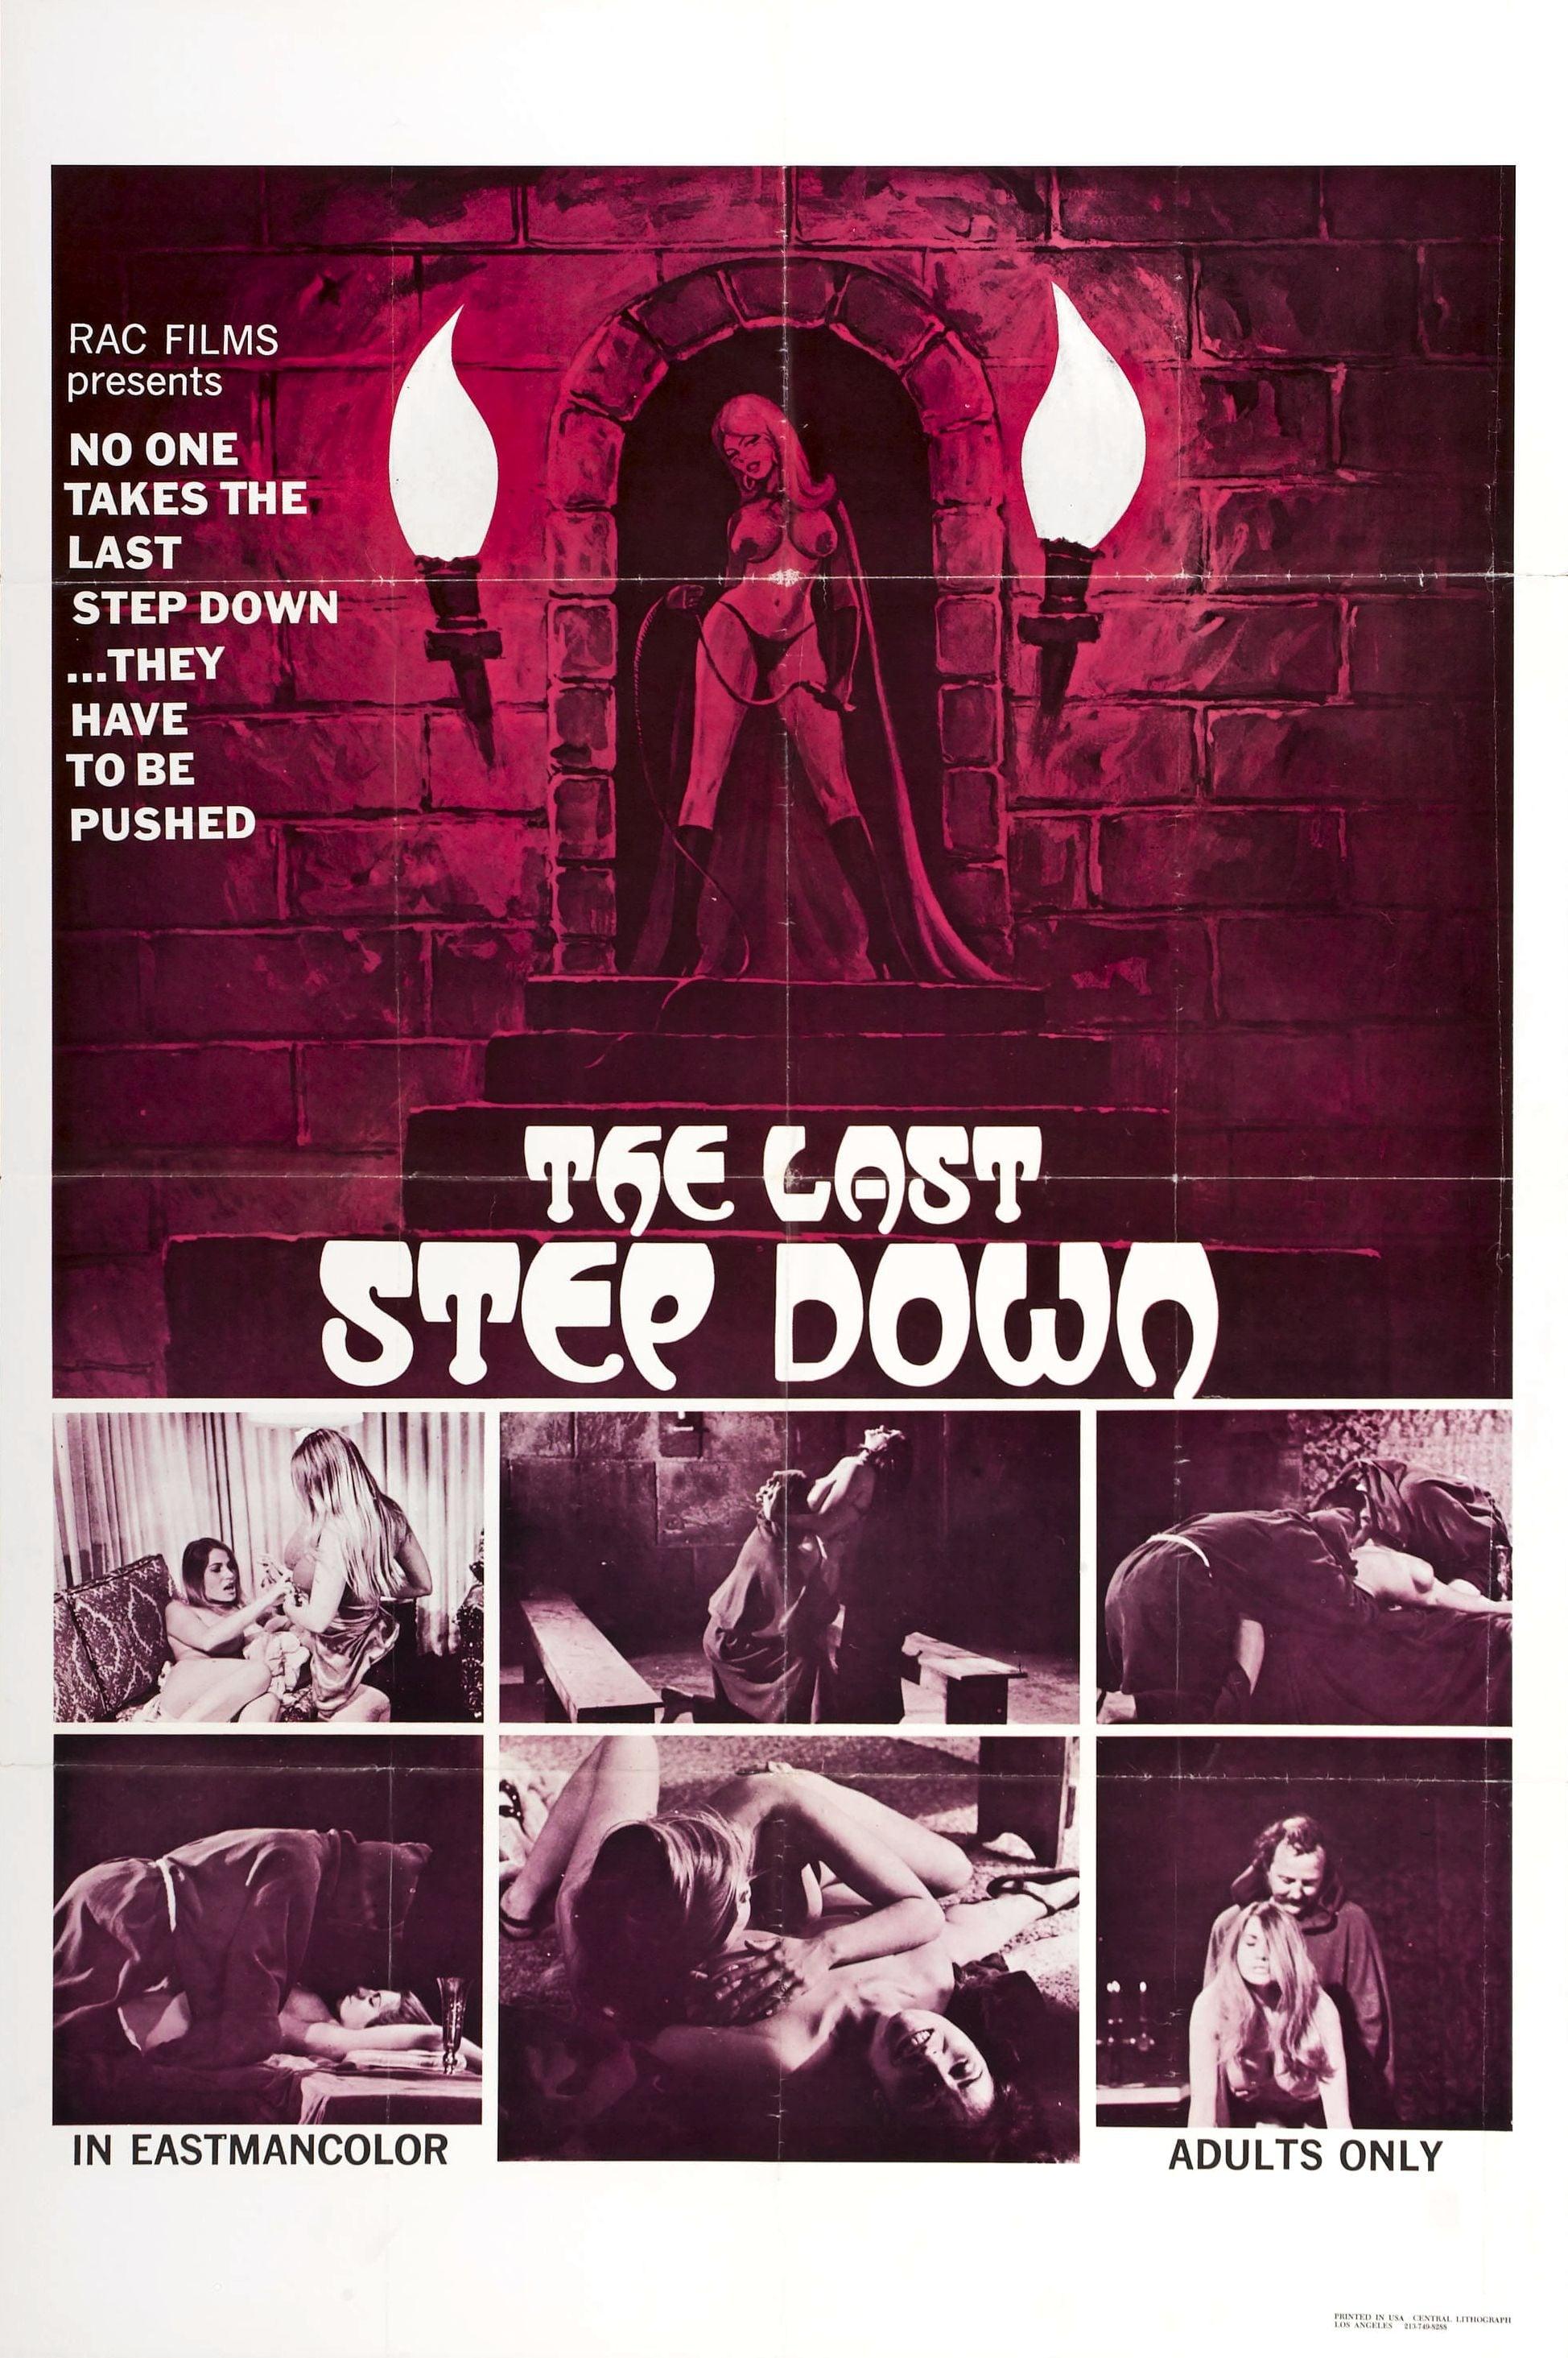 The Last Step Down poster